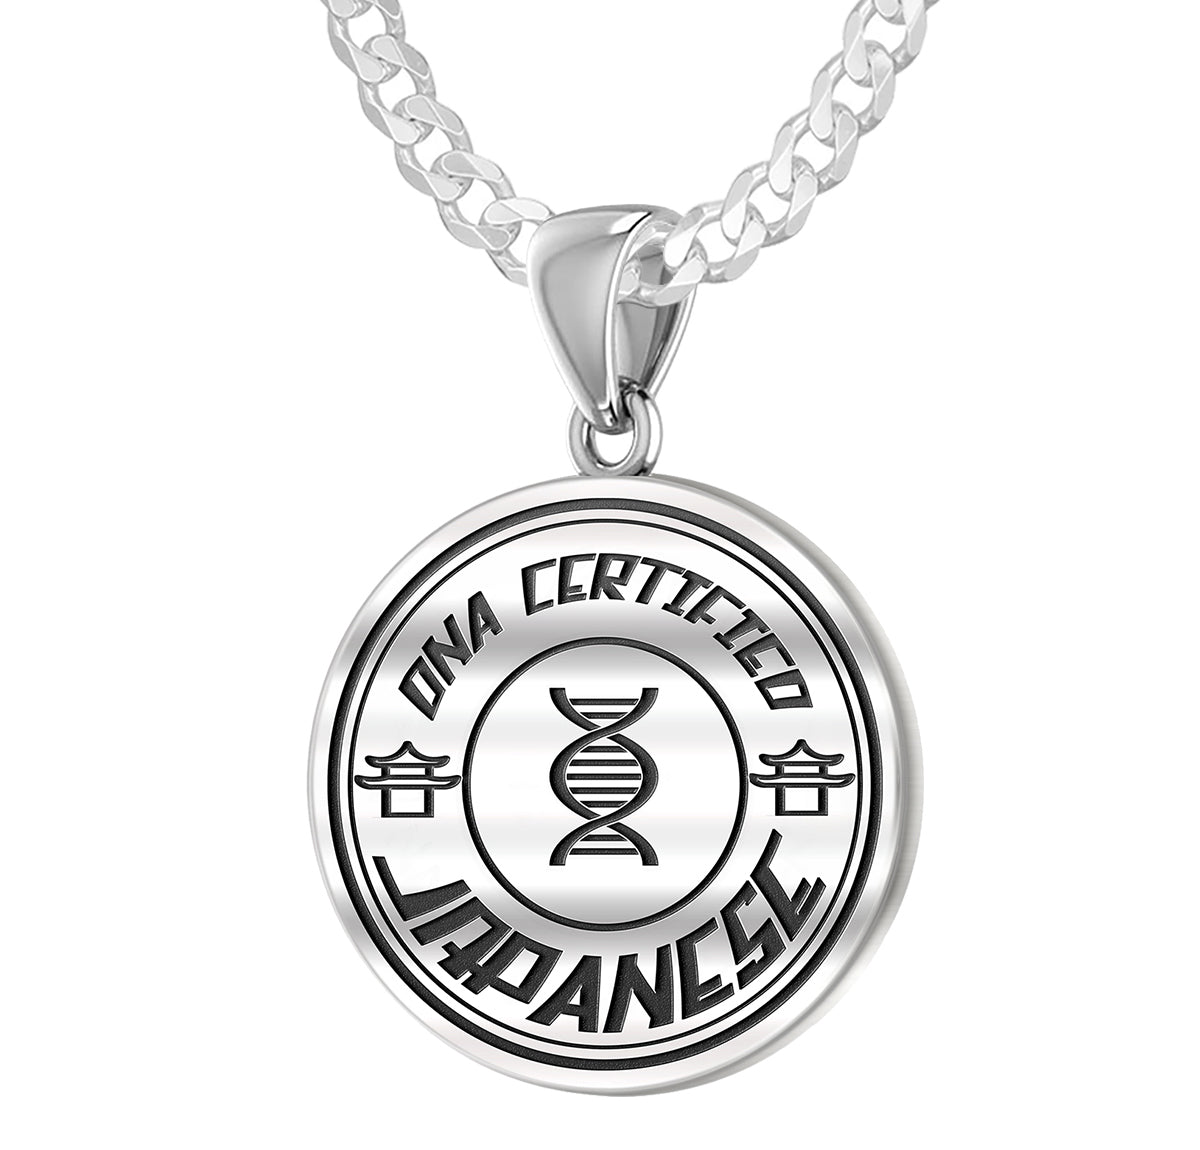 925 Sterling Silver 1in DNA Certified Japanese Heritage Pendant Medal with Flag Necklace - US Jewels